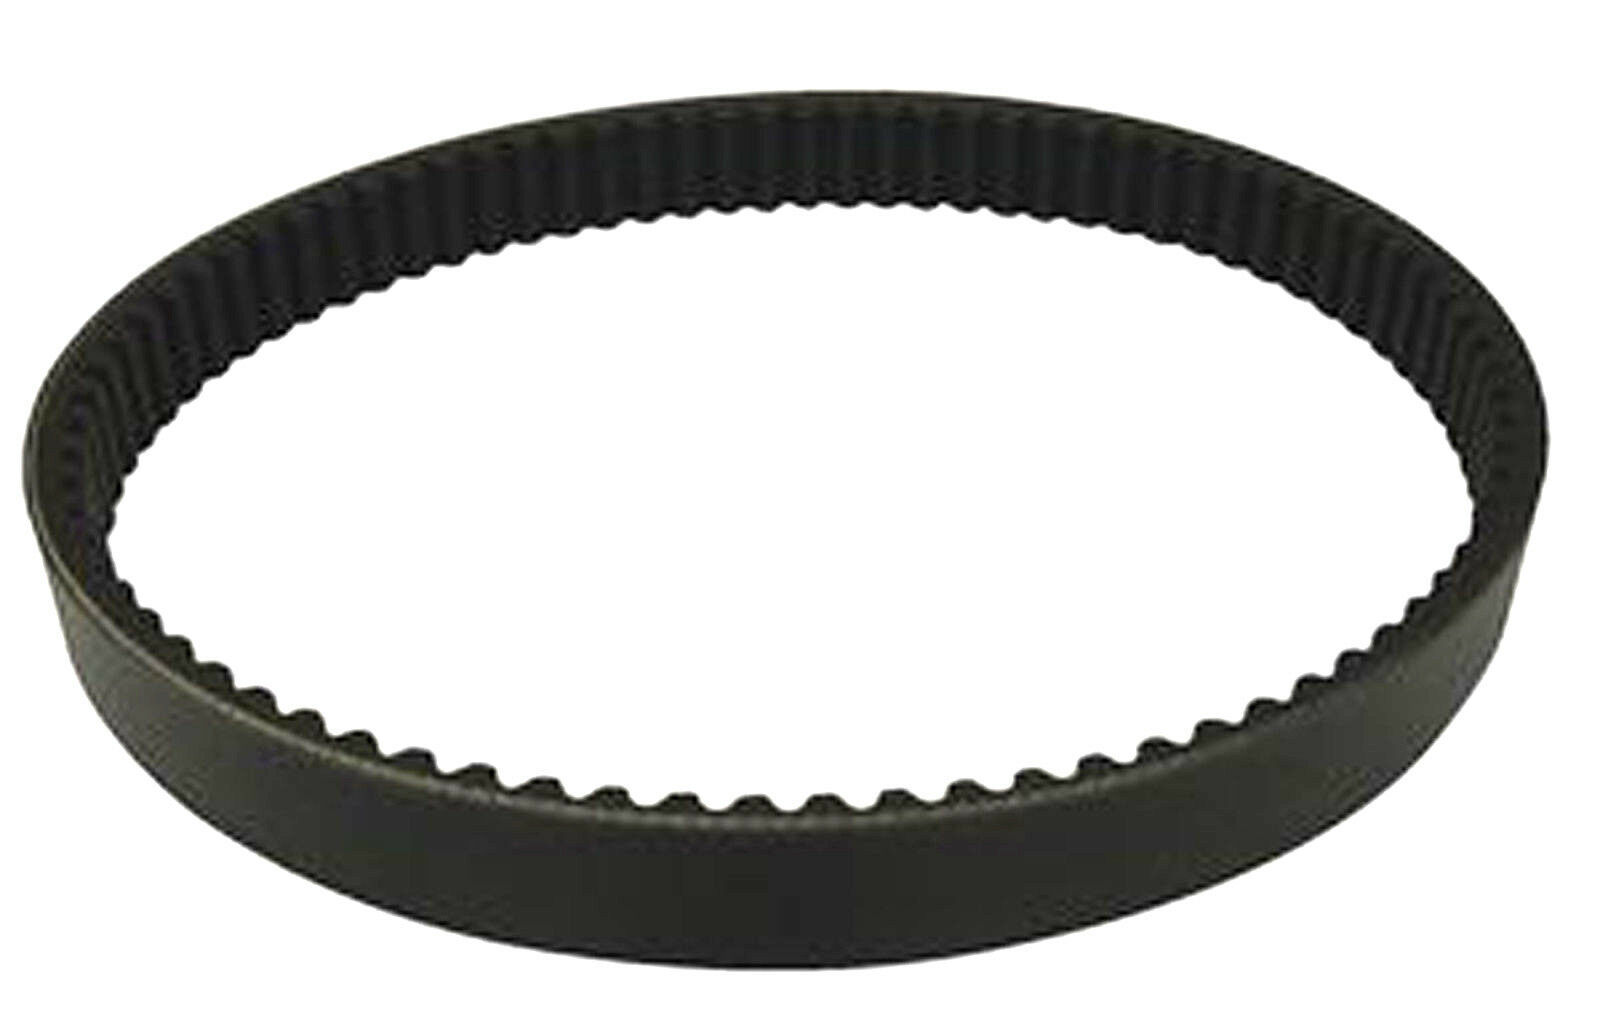 Primary image for **New Replacement Belt** for use with Delta 49-415 15-350 15-655 Drill Press